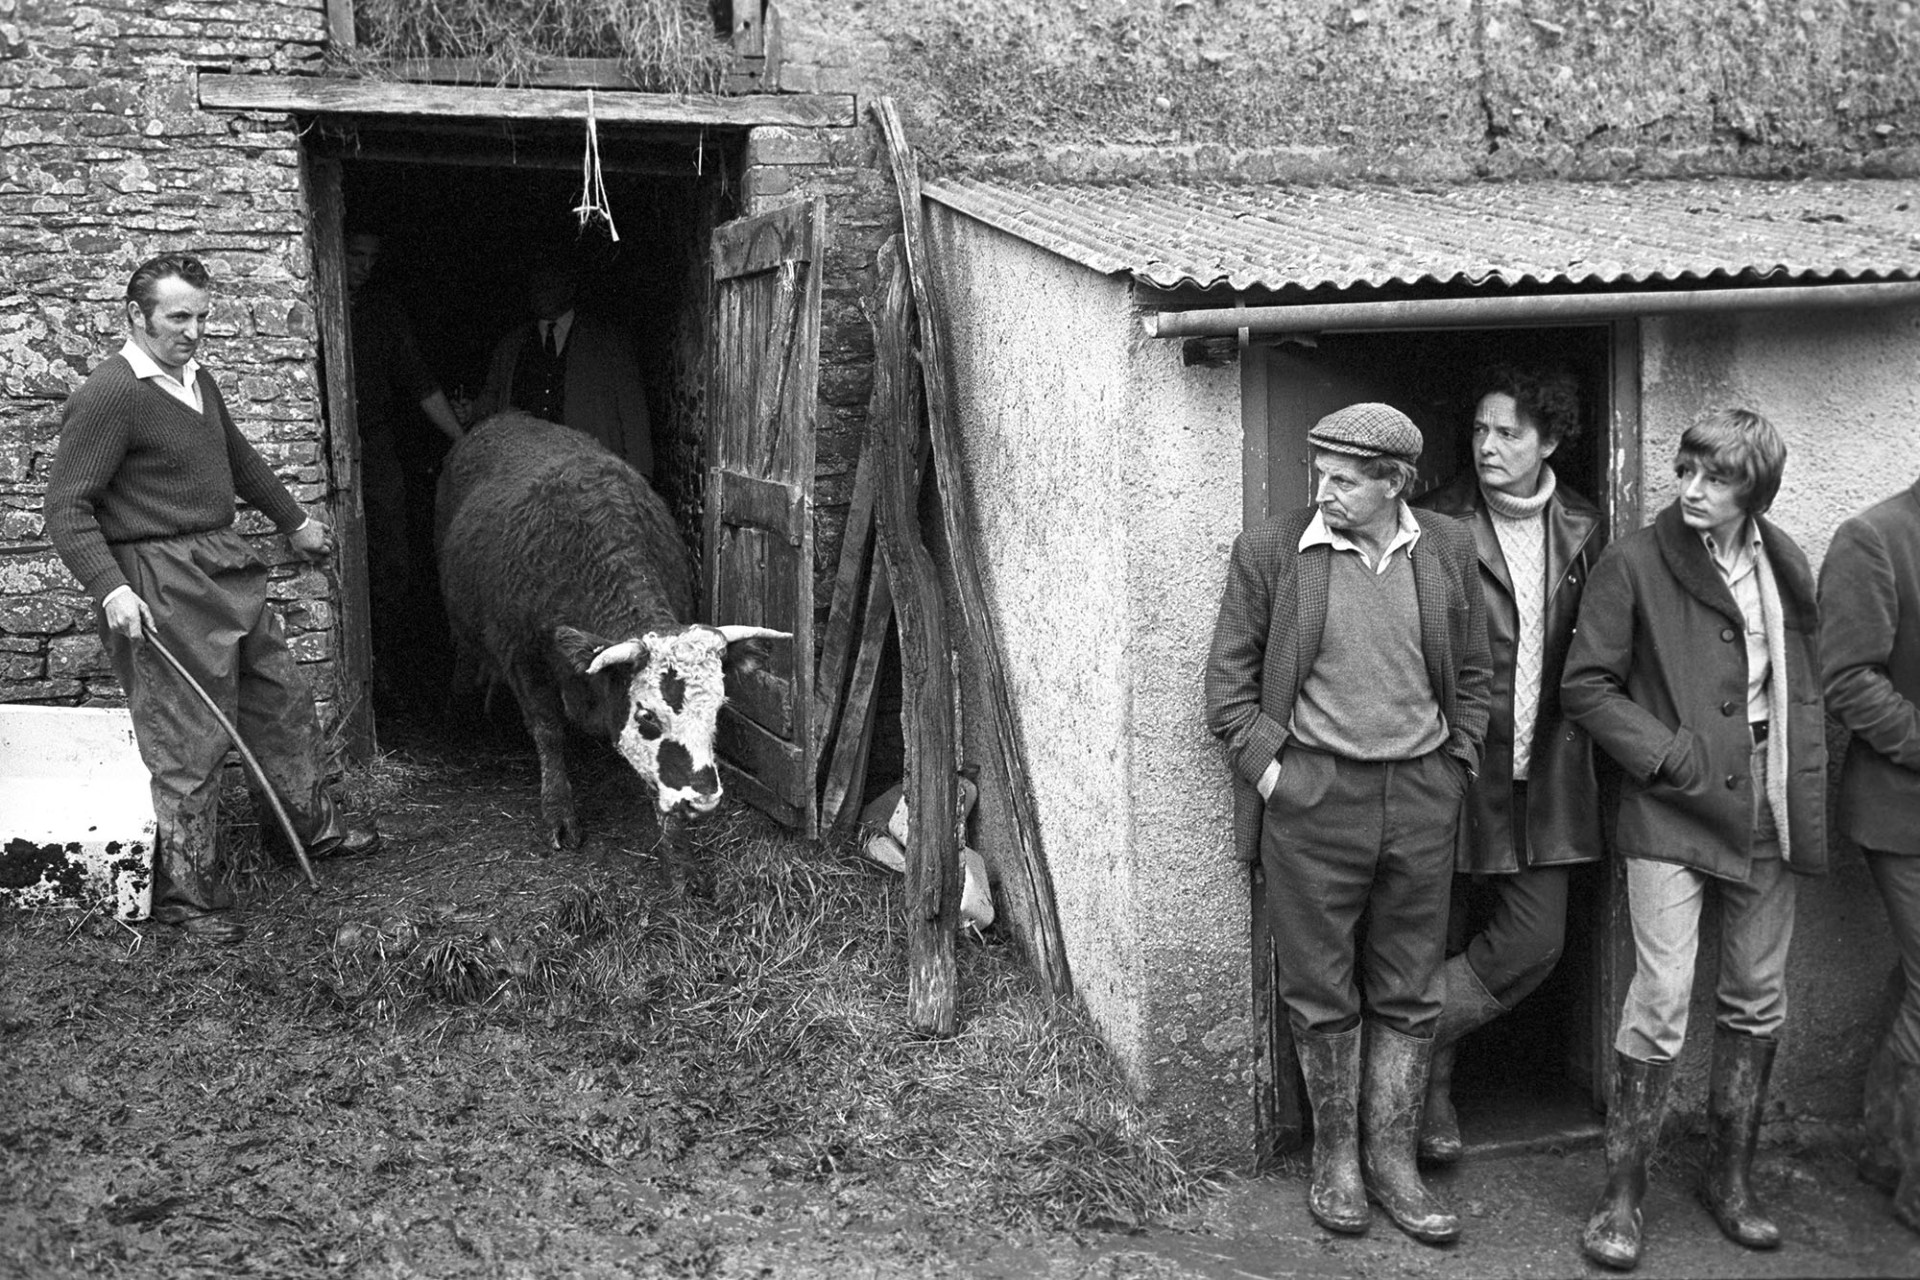 Cow emerging from barn at Farm Sale.
[A man letting a horned cow out of a barn and into the farmyard at a farm sale at White Cleave Farm in Burrington. Men are waiting by the barn to see the cow.]